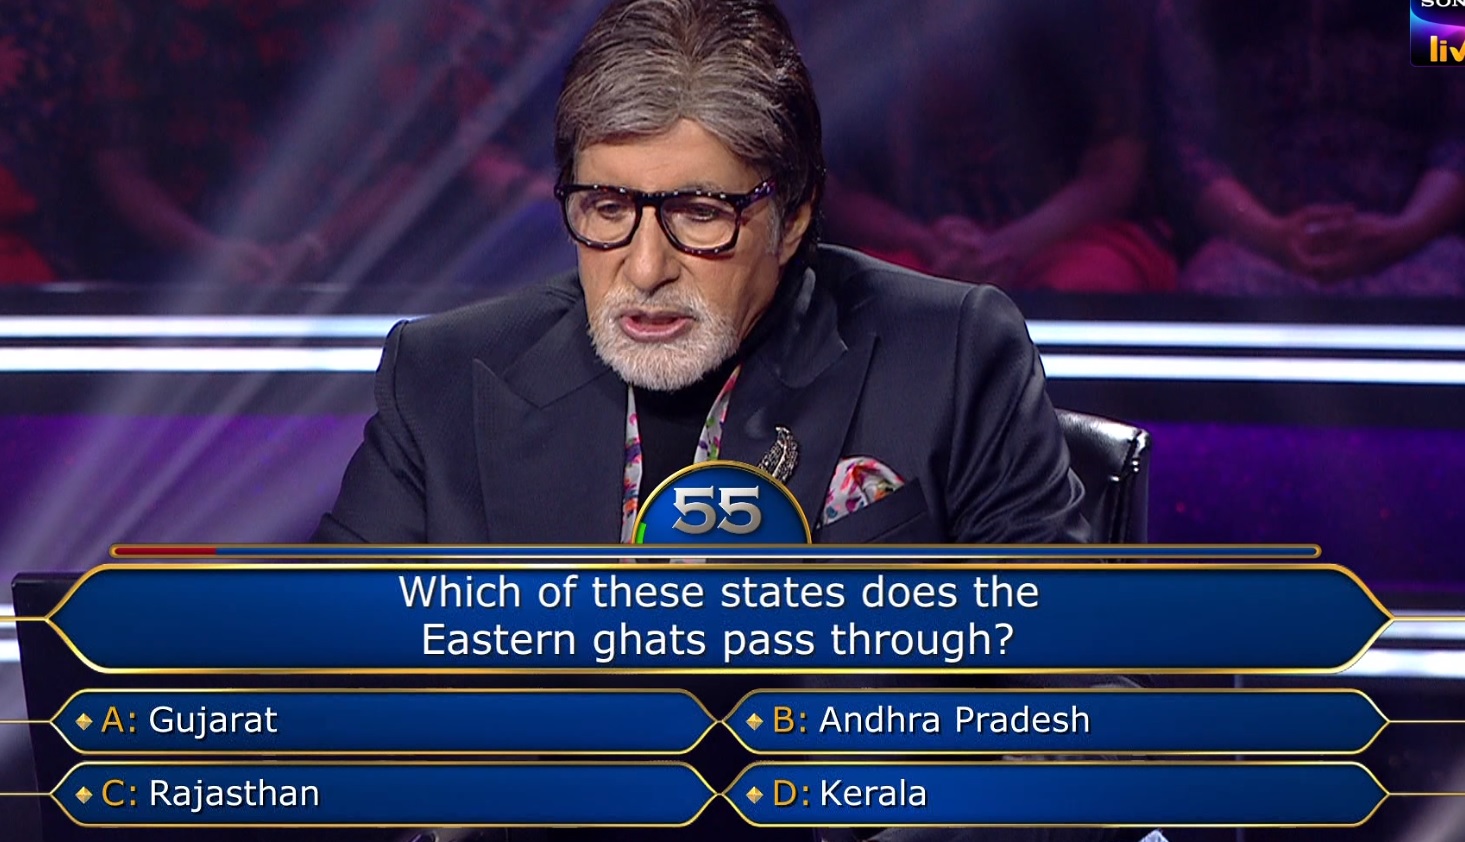 Ques : Which of these states does the Eastern ghats pass through?